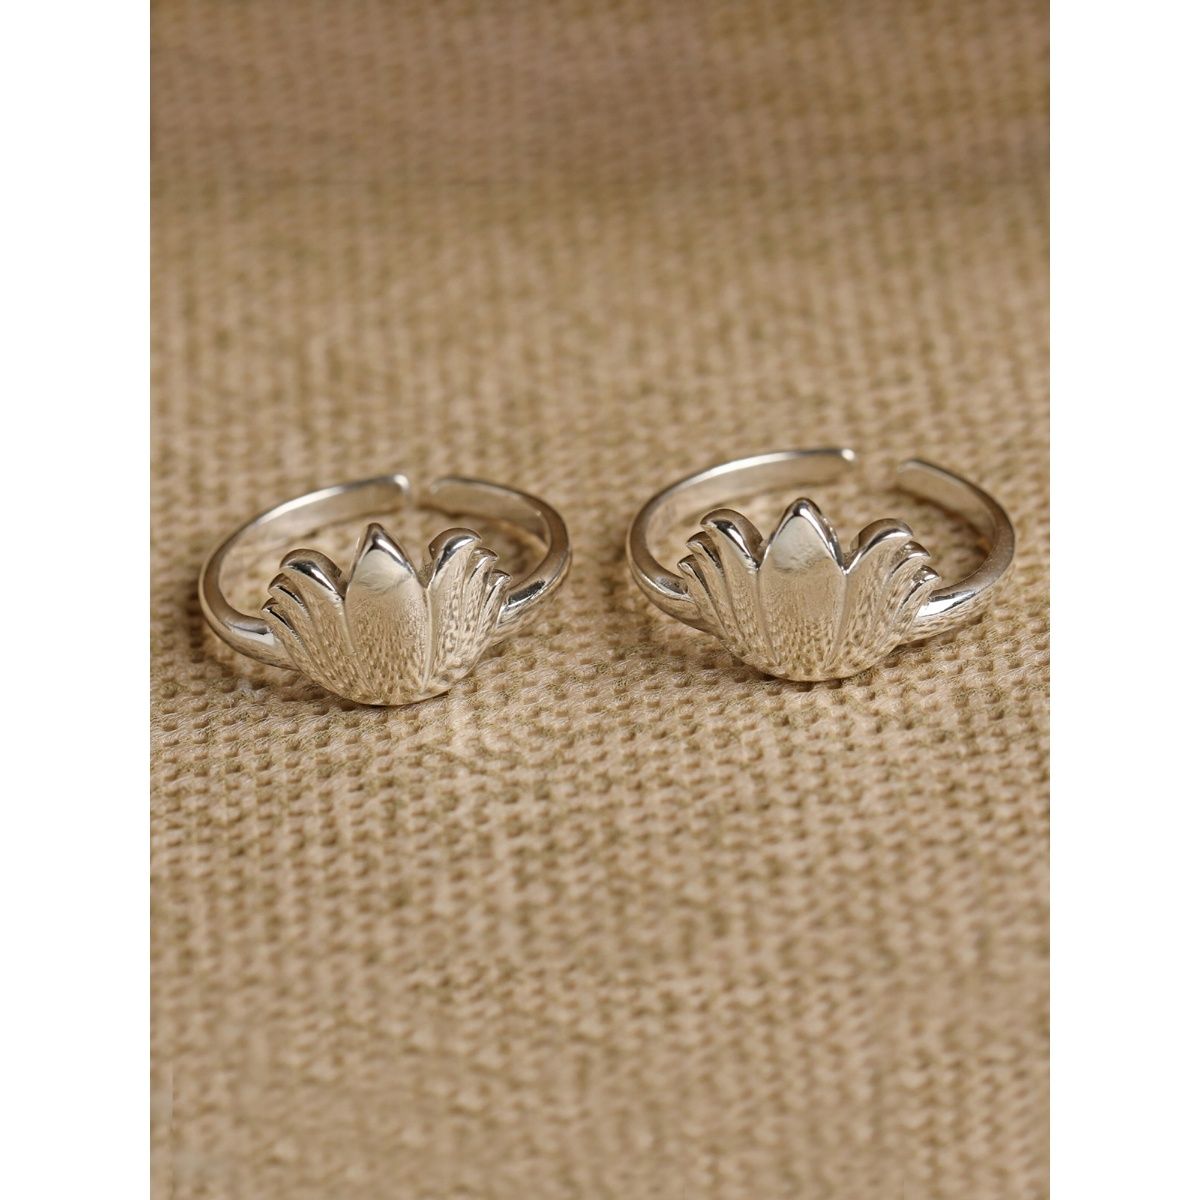 Fine sterling silver lotus flower double rope toe ring 3120 toe rings, one  size